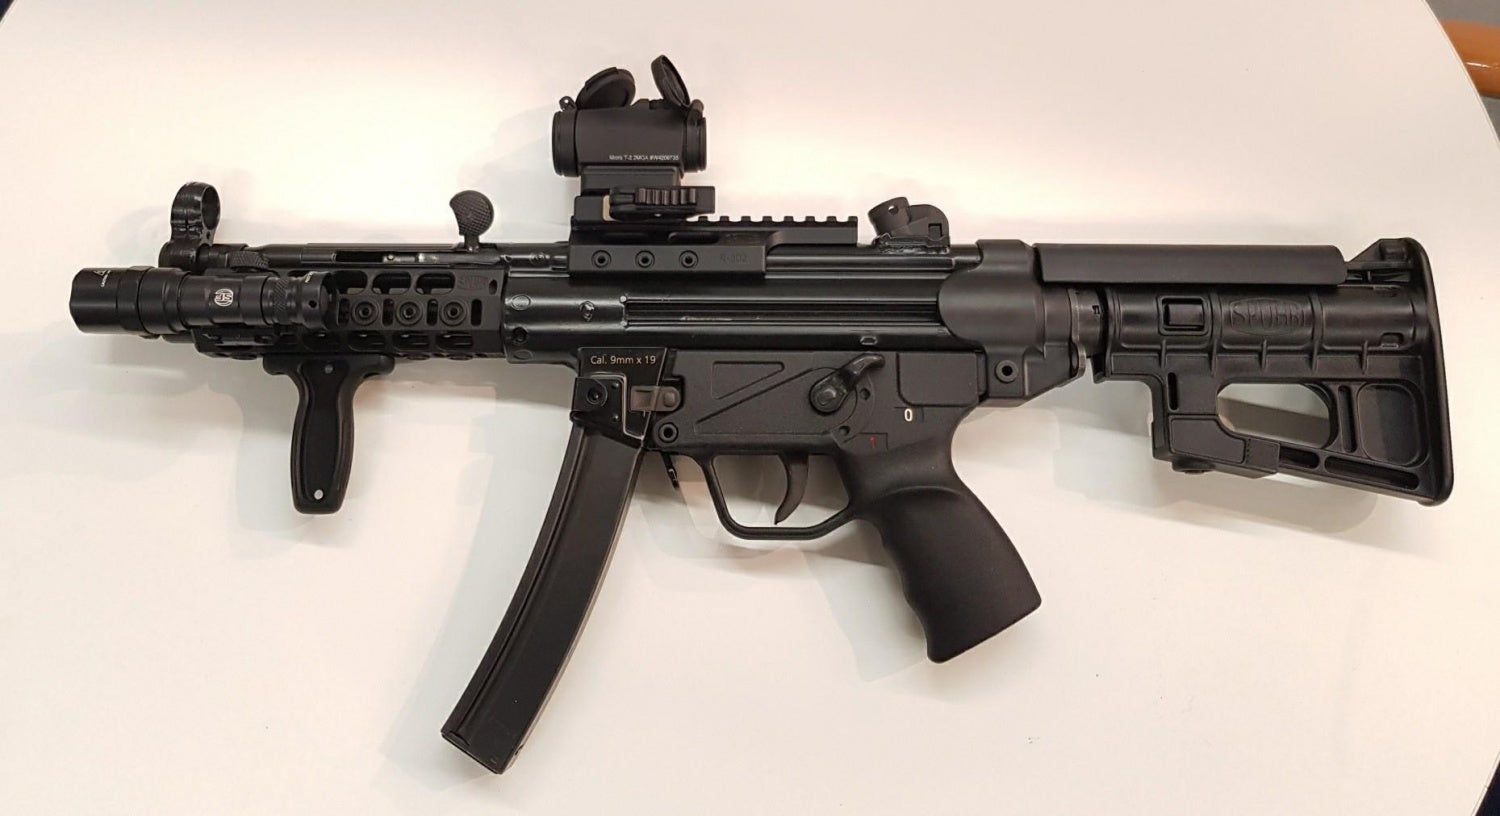 New HK MP5 upgrades from Spuhr.